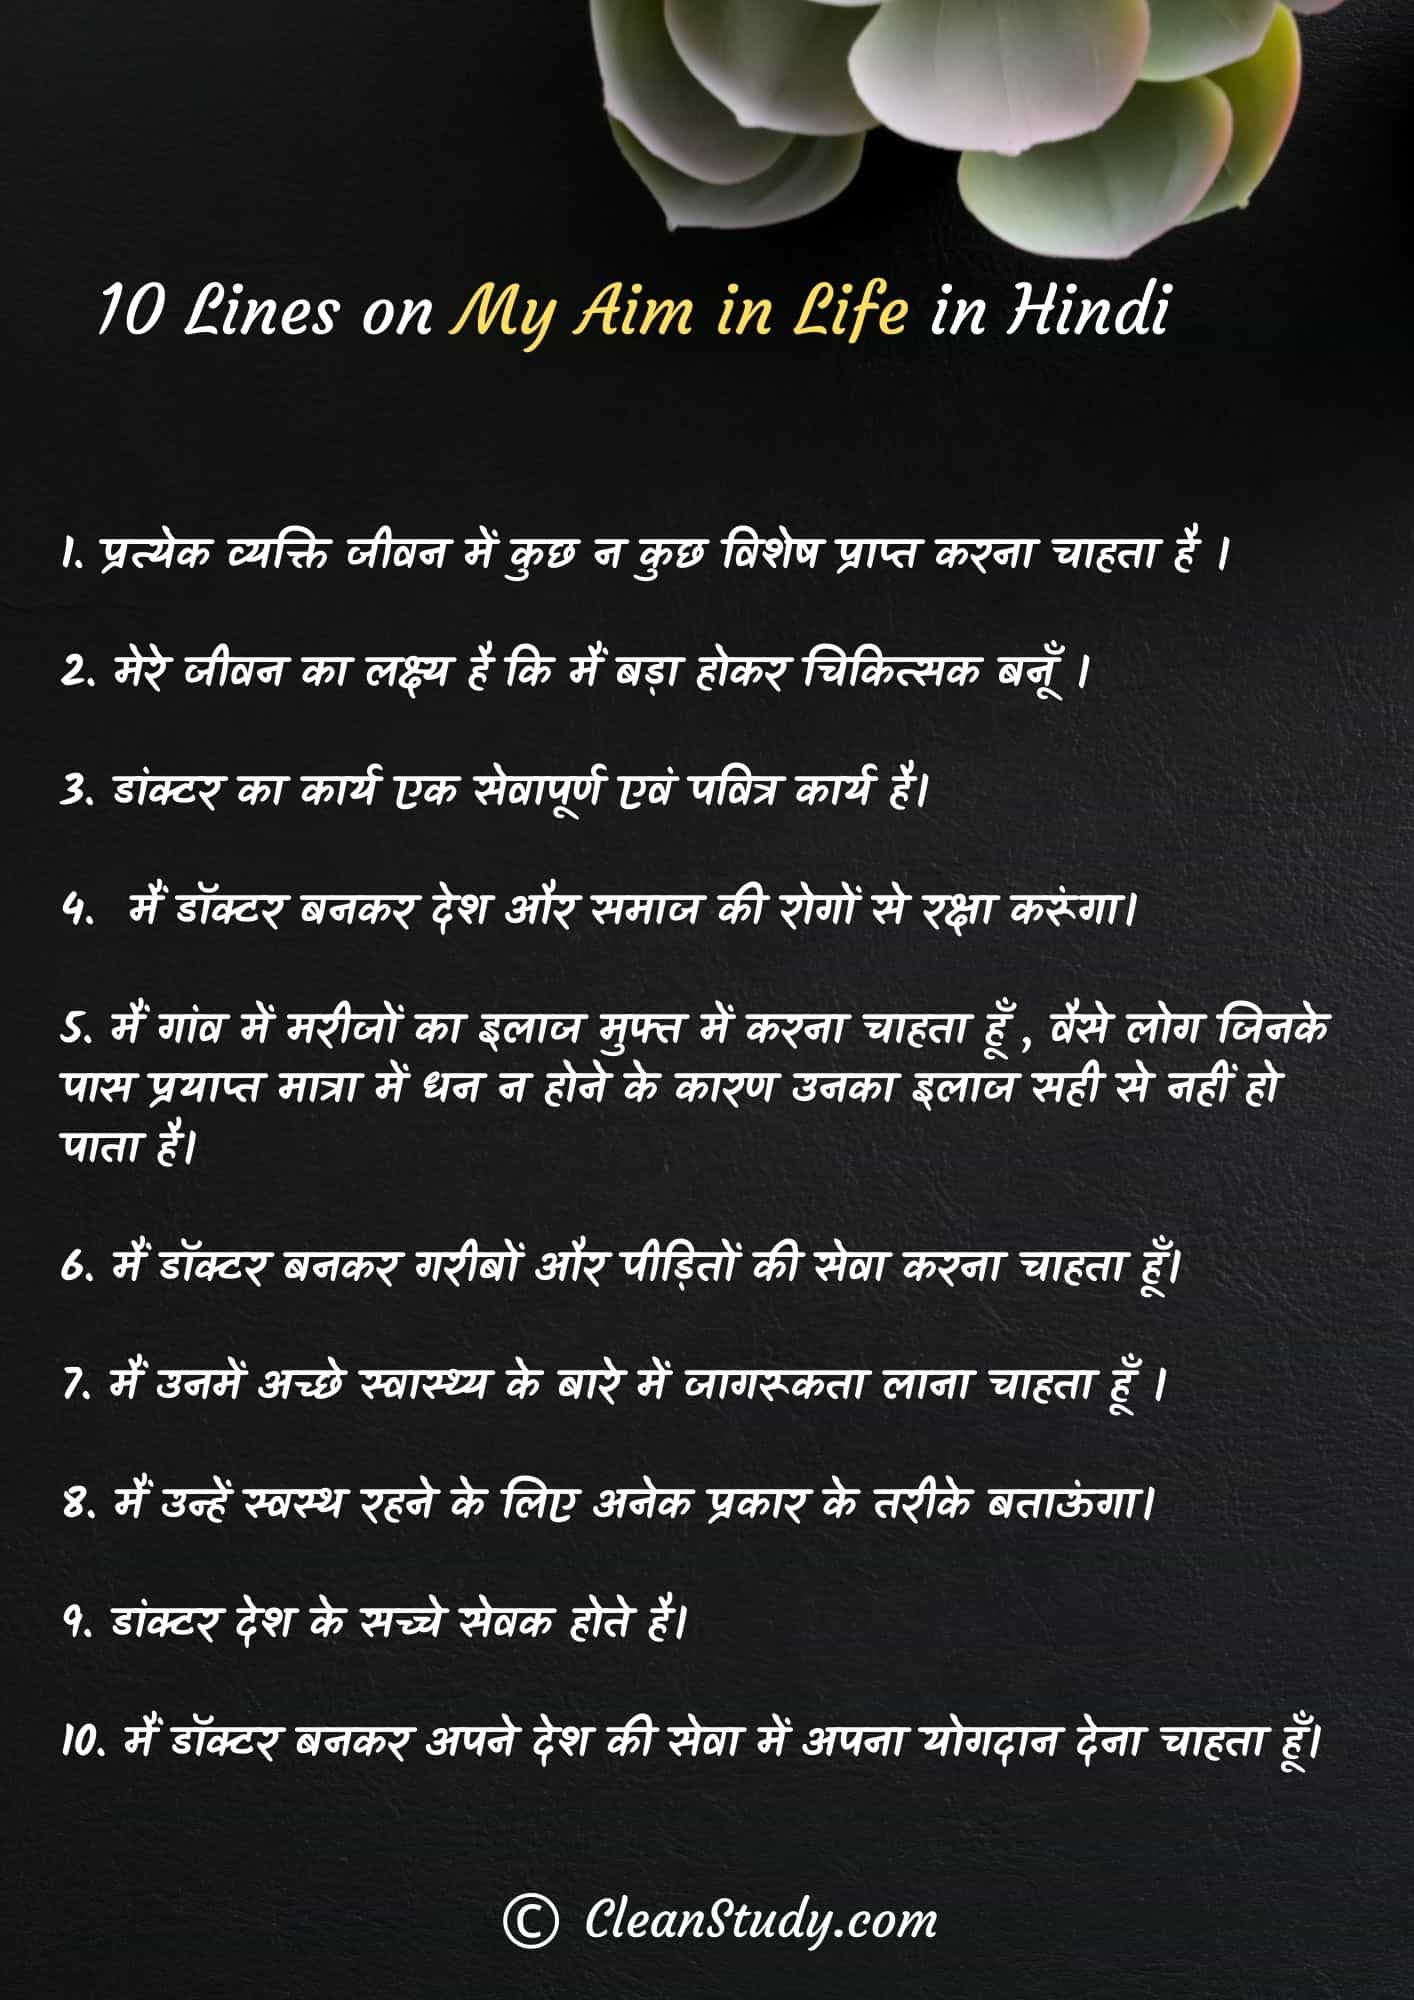 an essay in hindi on my aim in life